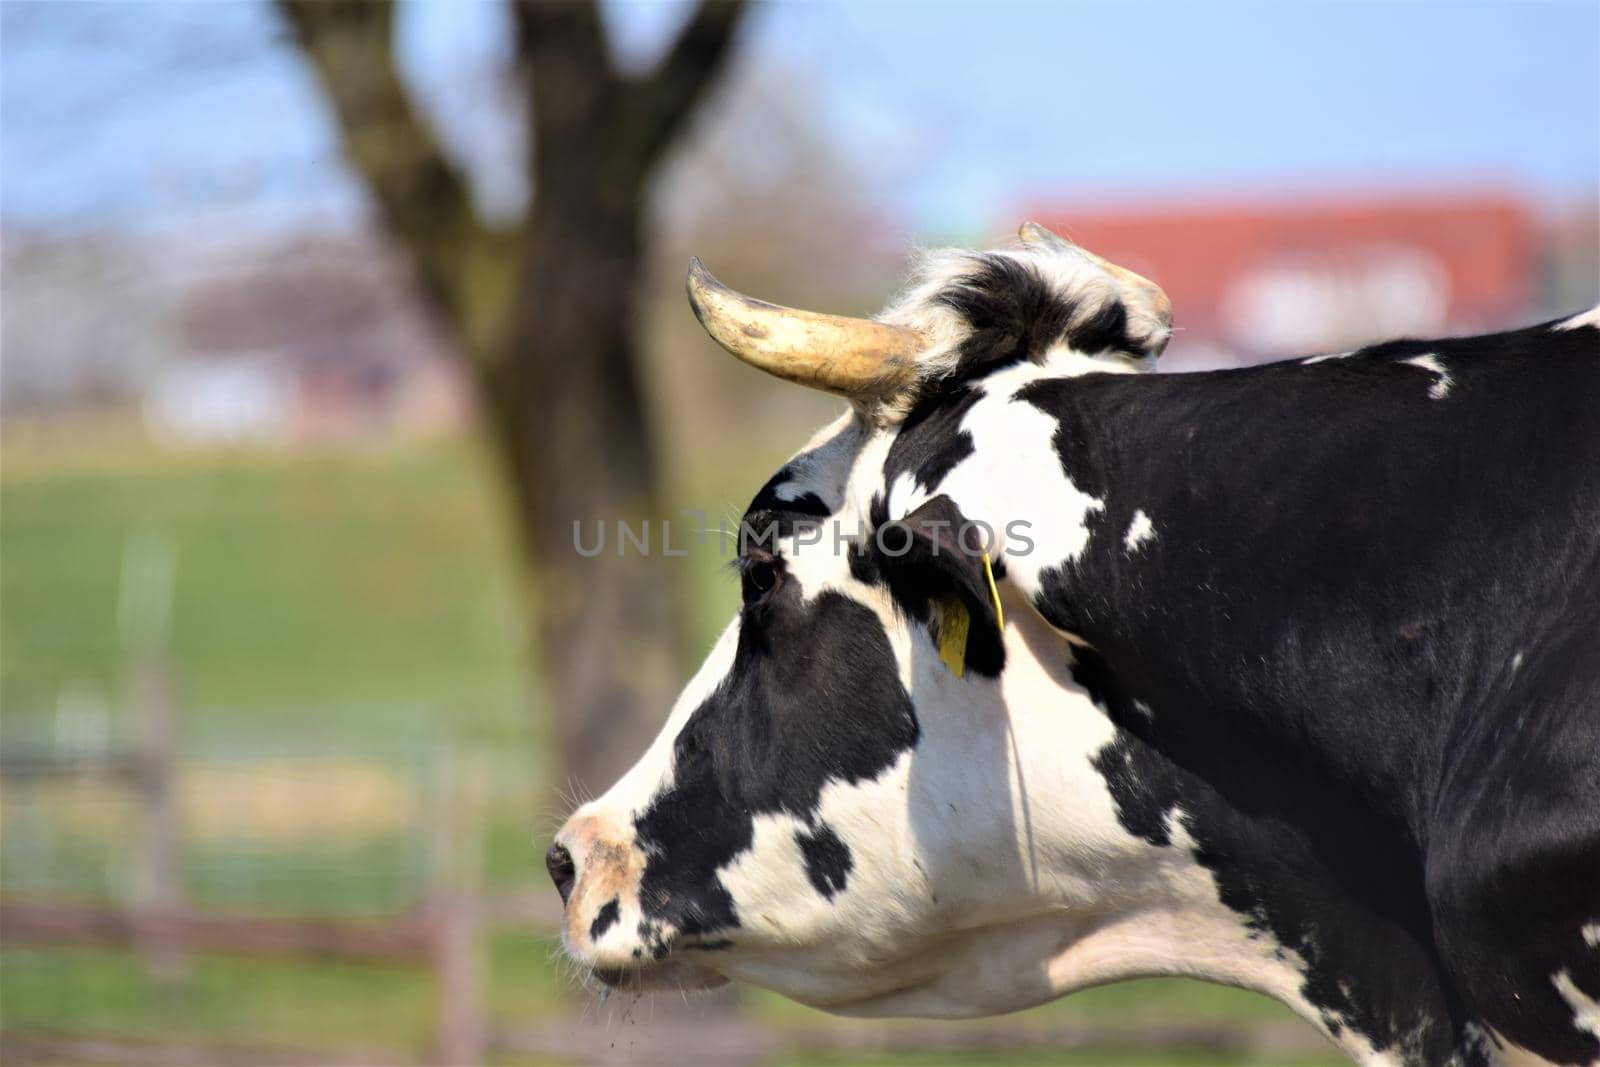 Portrait of the head of a black and white cow against a blue sky with trees by Luise123